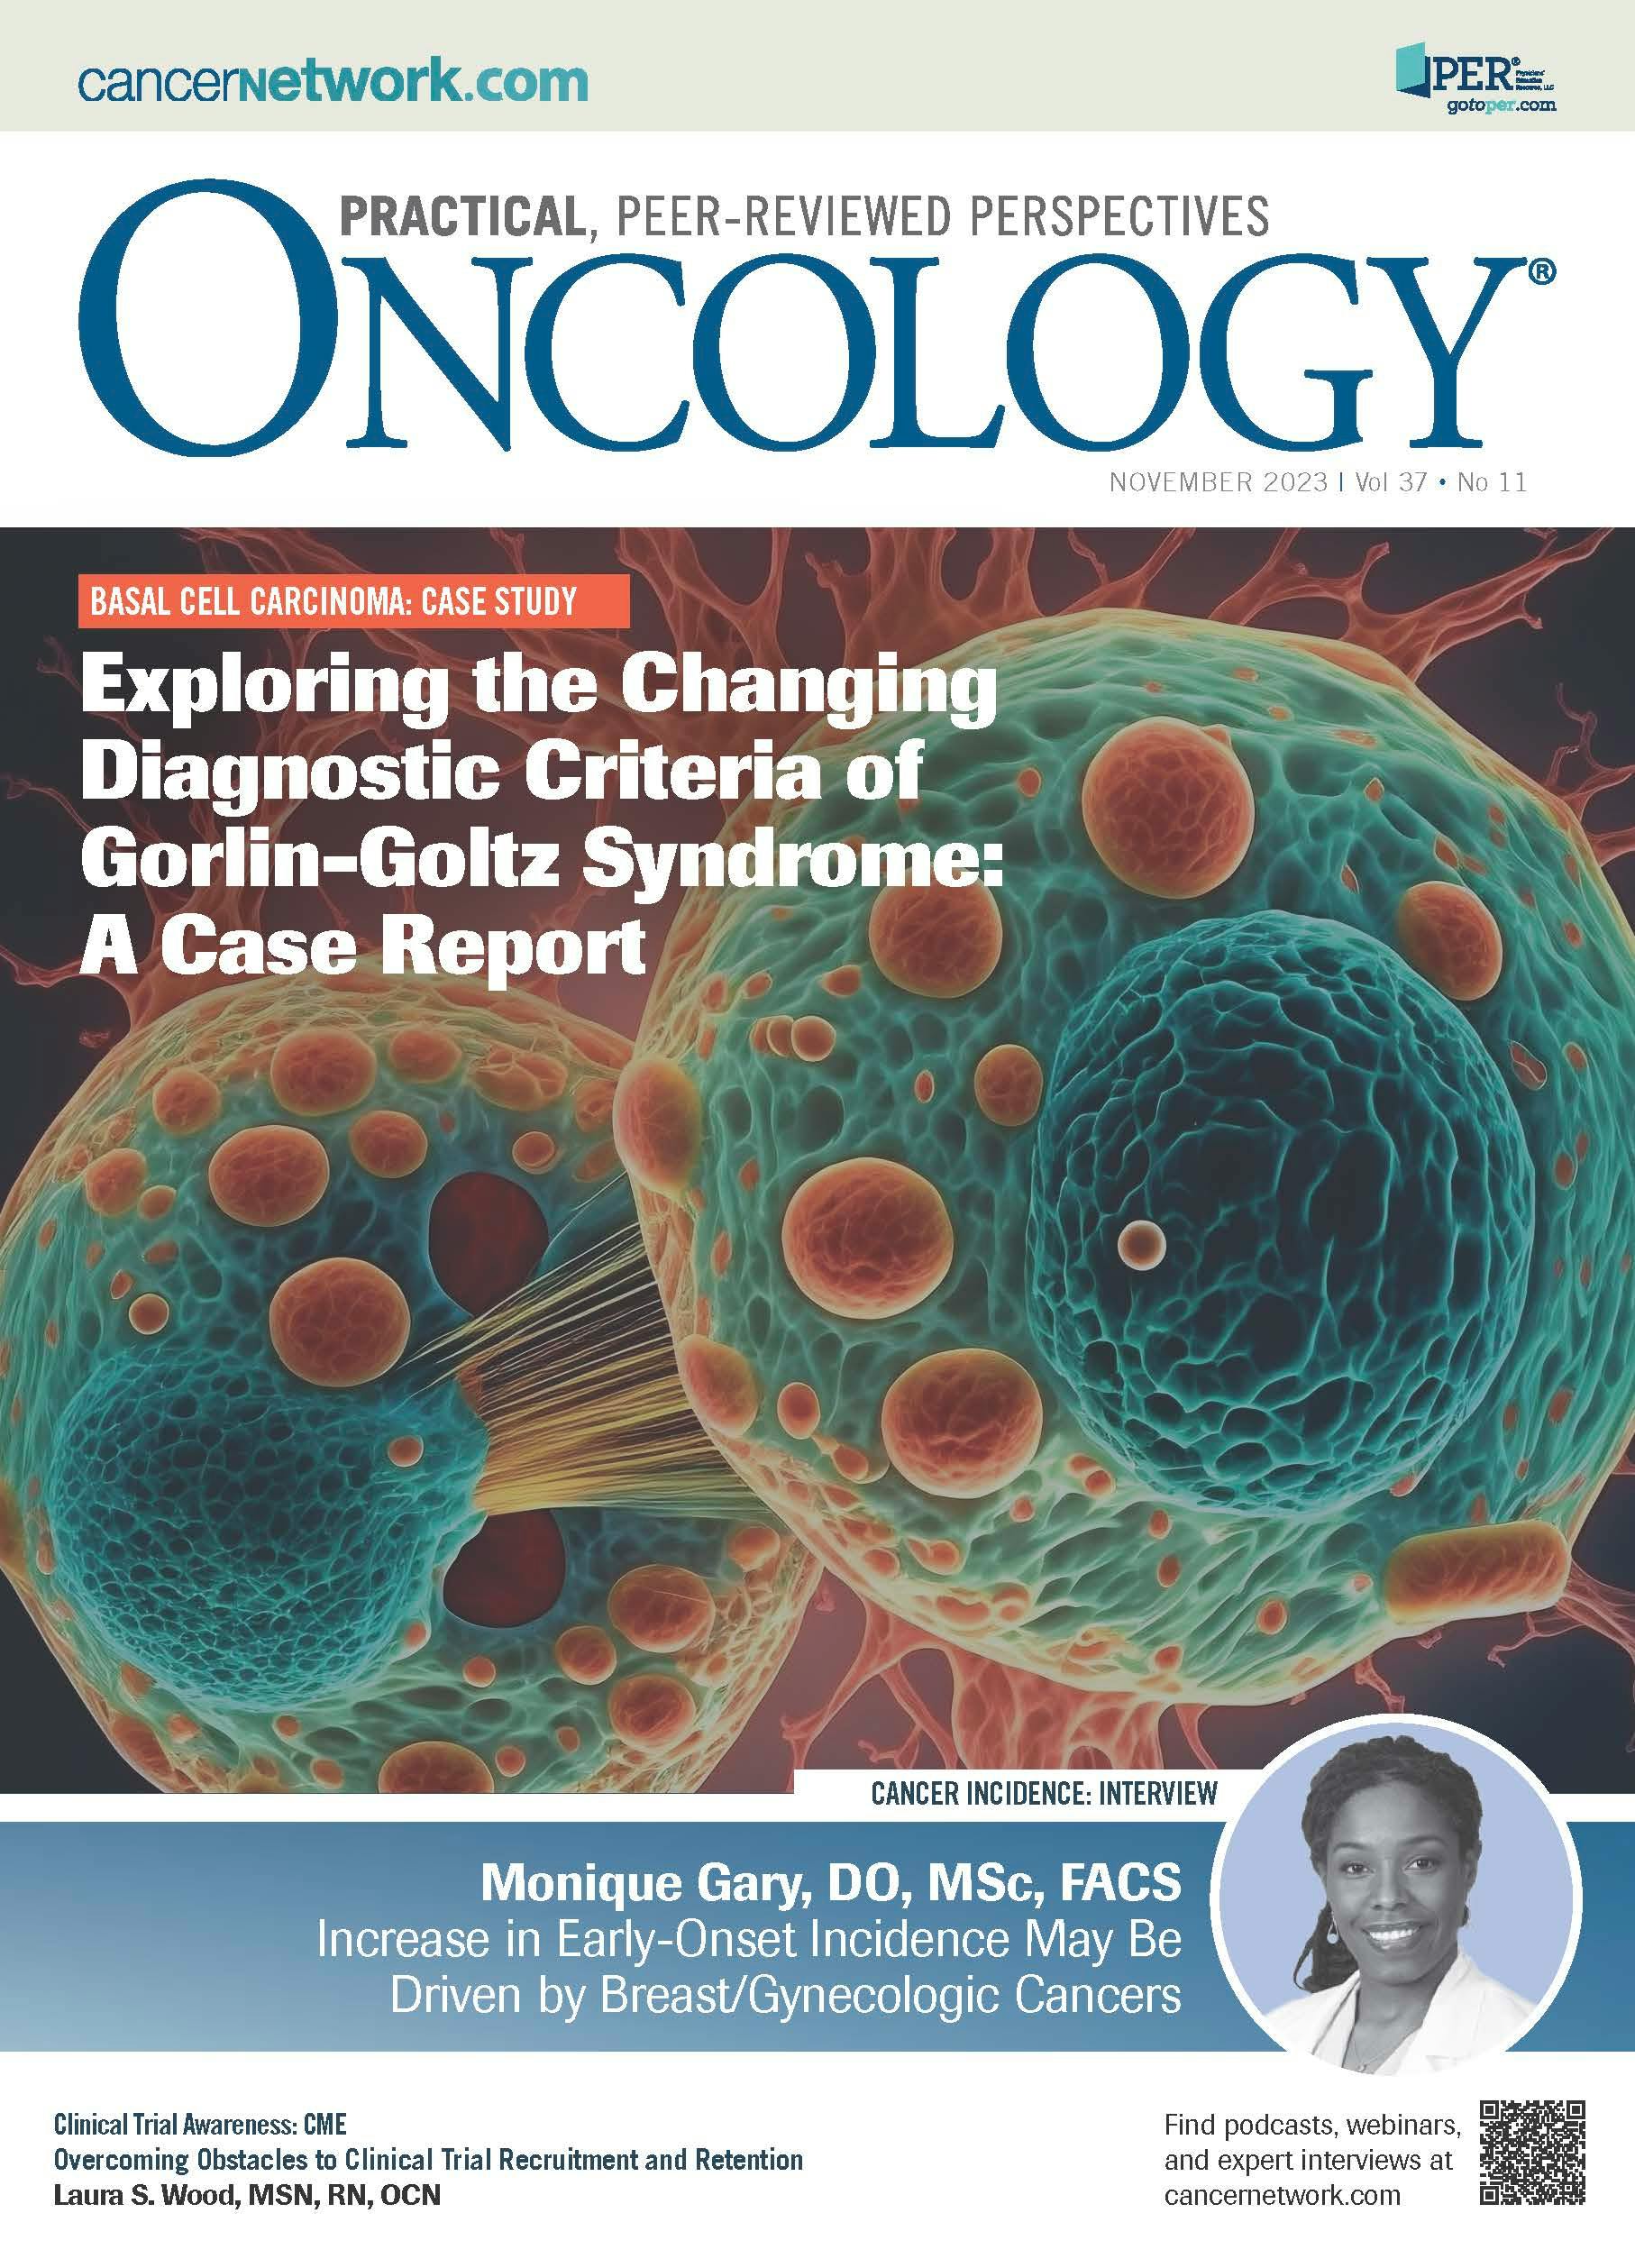 ONCOLOGY Vol 37, Issue 11